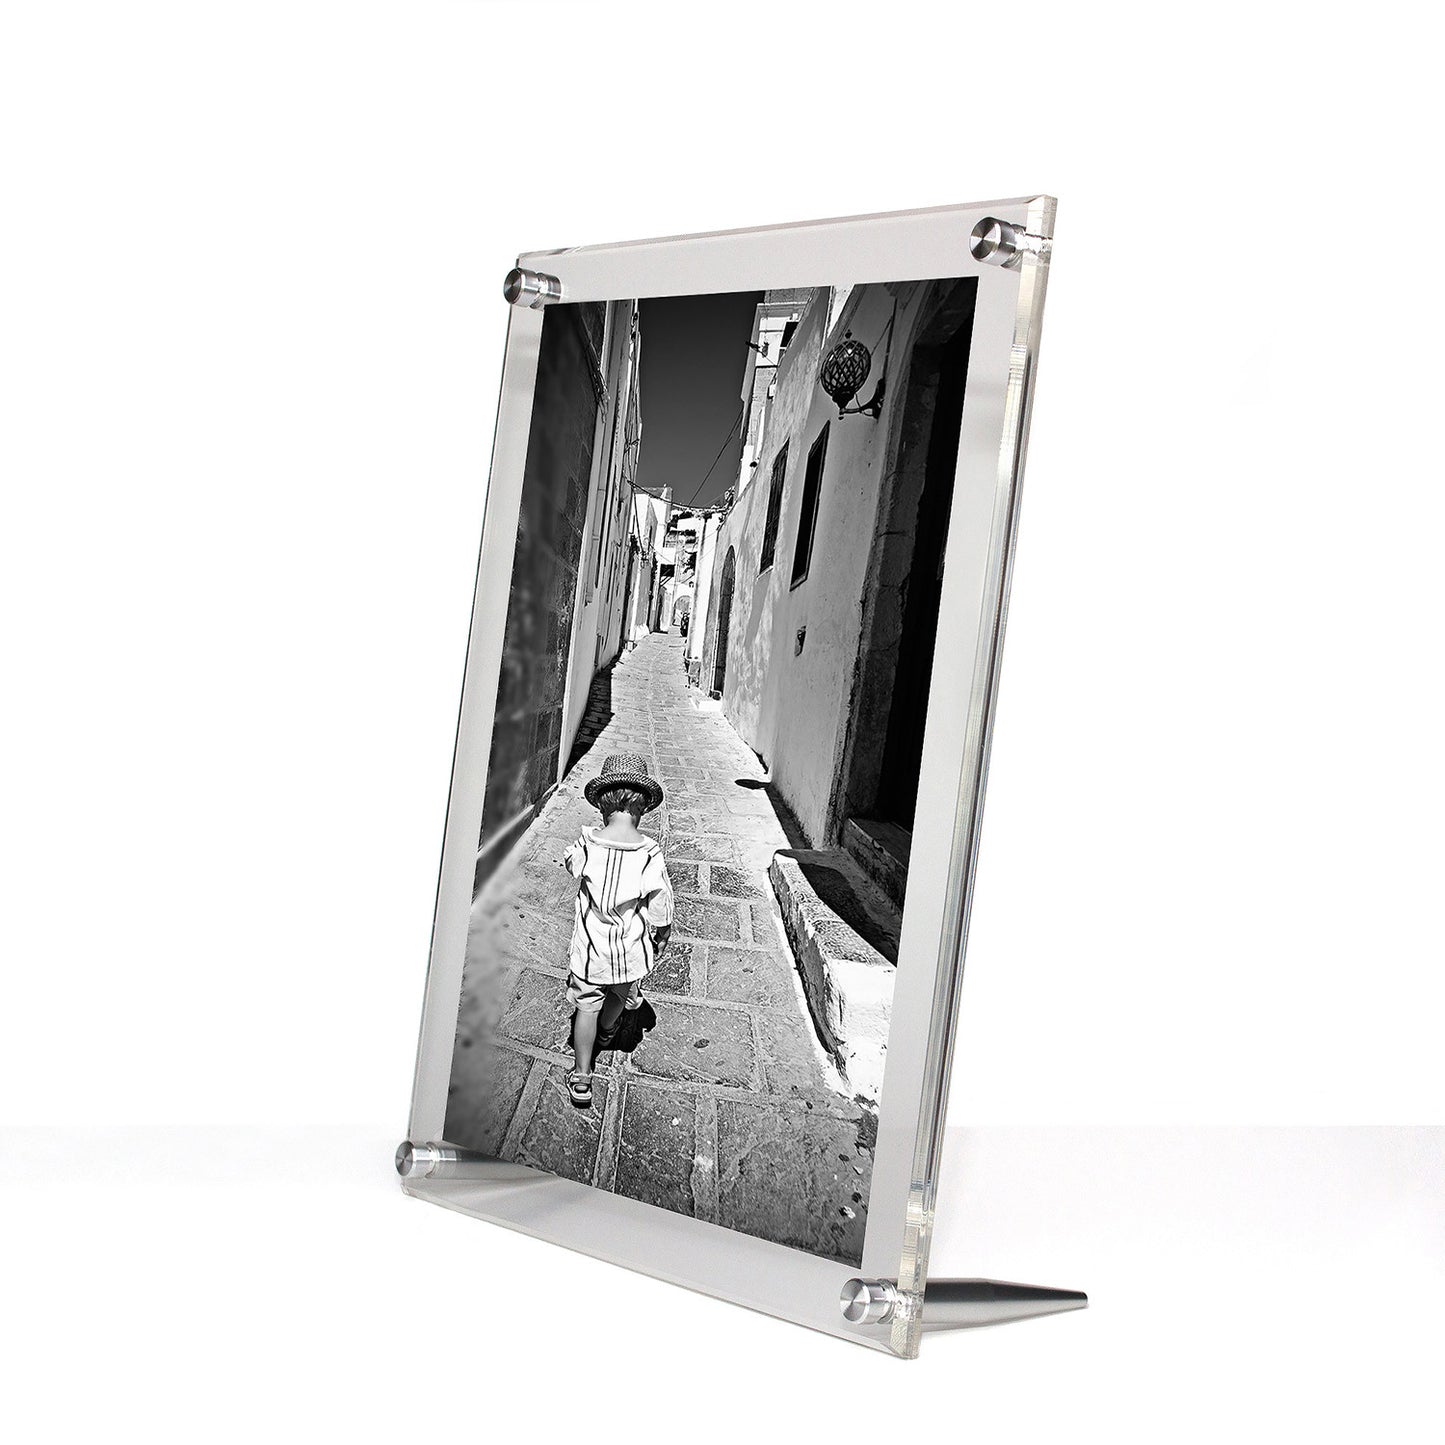 Case of 5 TableTop for 8x10" Photos